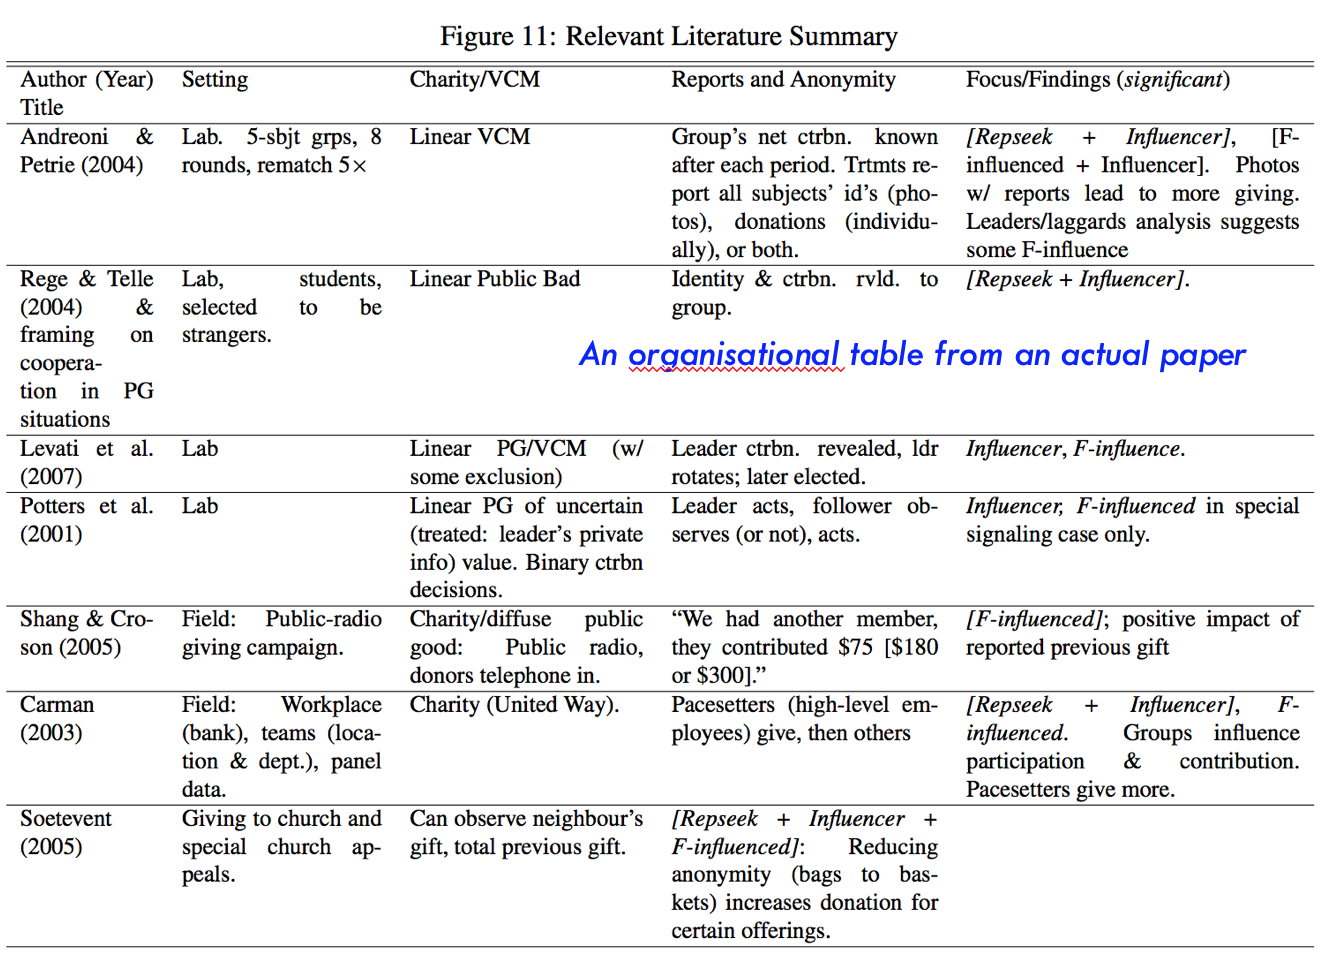 Organisational table from Reinstein and Riener, 2012b